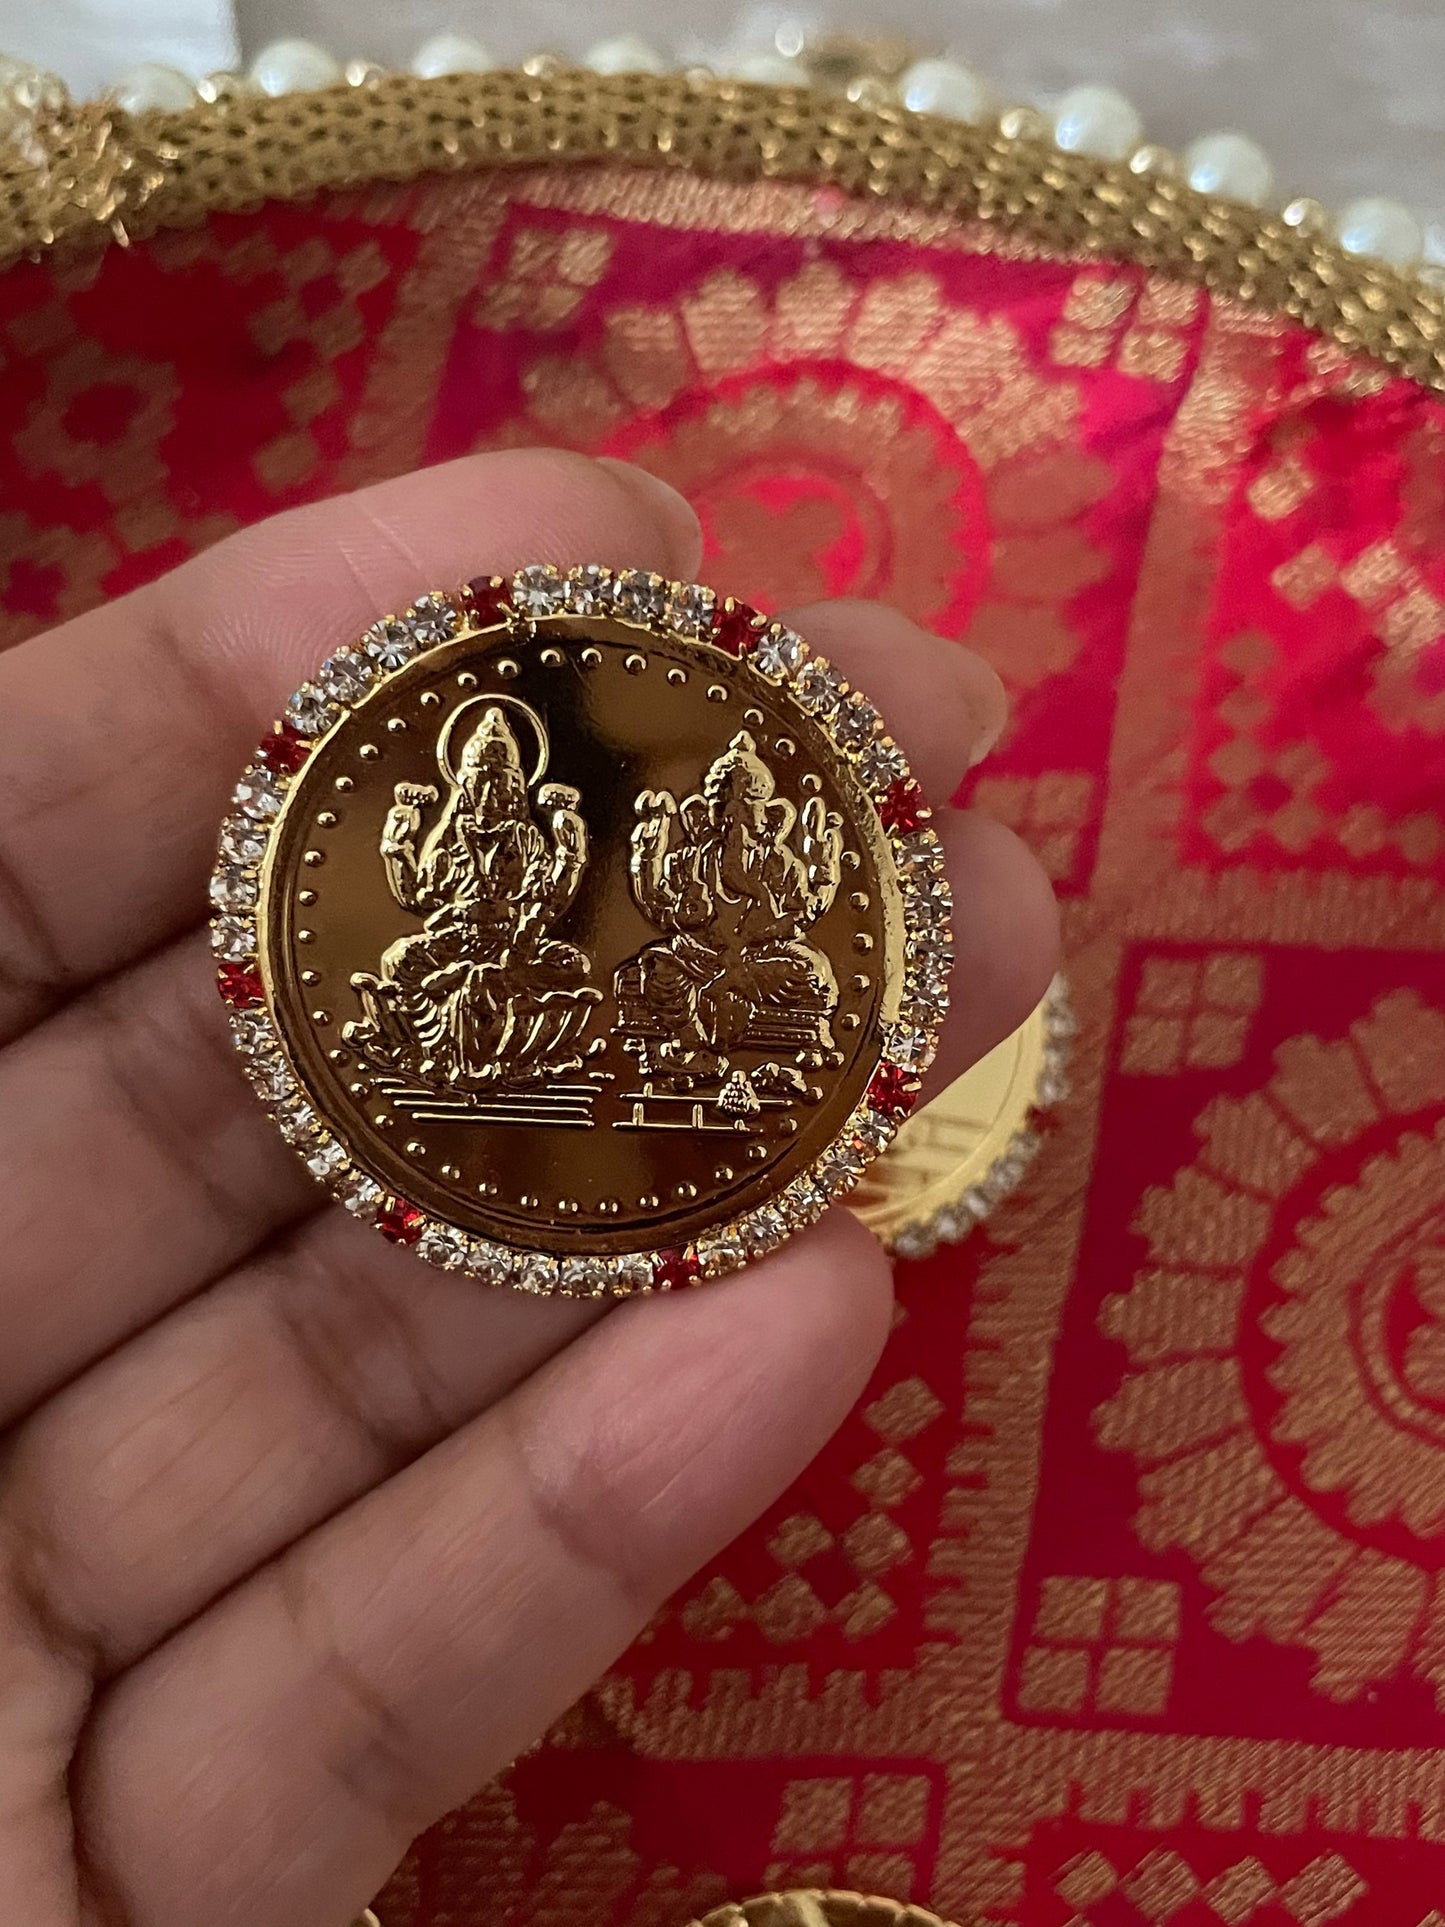 Religious Gifts| New Year Gifts| Lakshmi Ganesh Coin Gift Boxed | Hinduism| Good Luck| Prosperity| New Home| House Warming Return Gifts